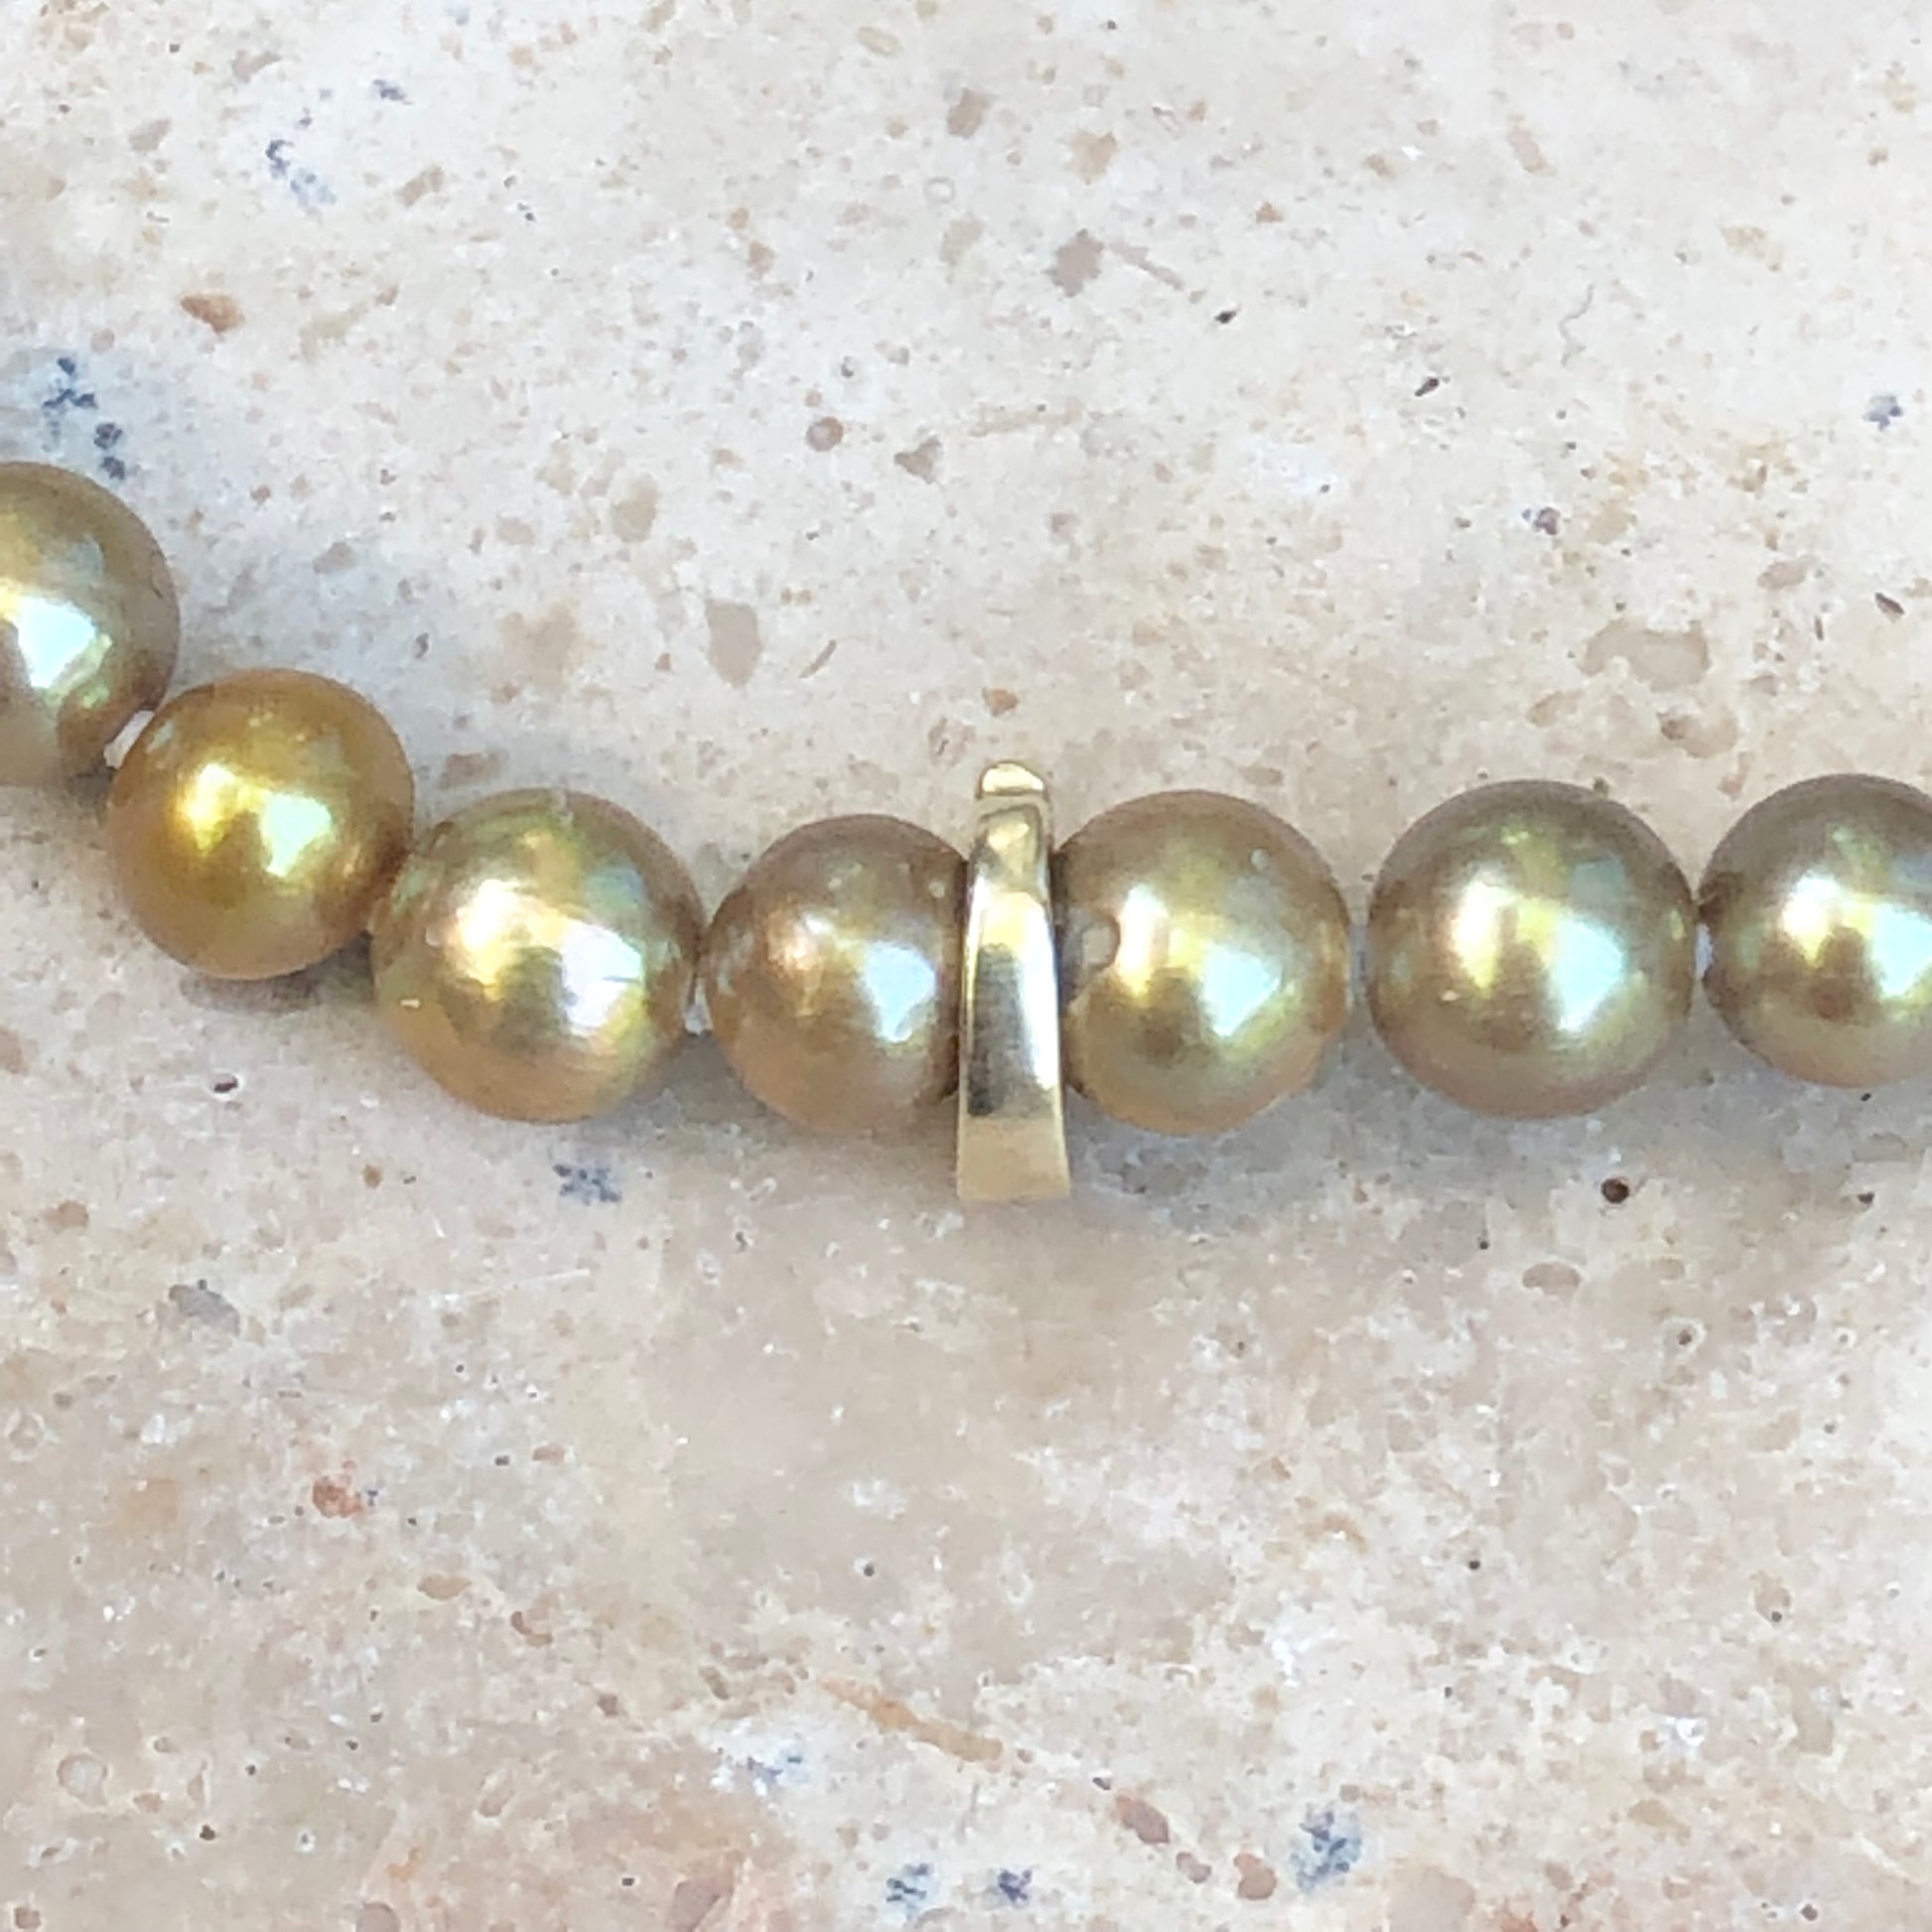 14KT Yellow Gold Small Pearl Enhancer 5mm, 14KT Yellow Gold Small Pearl Enhancer 5mm - Legacy Saint Jewelry